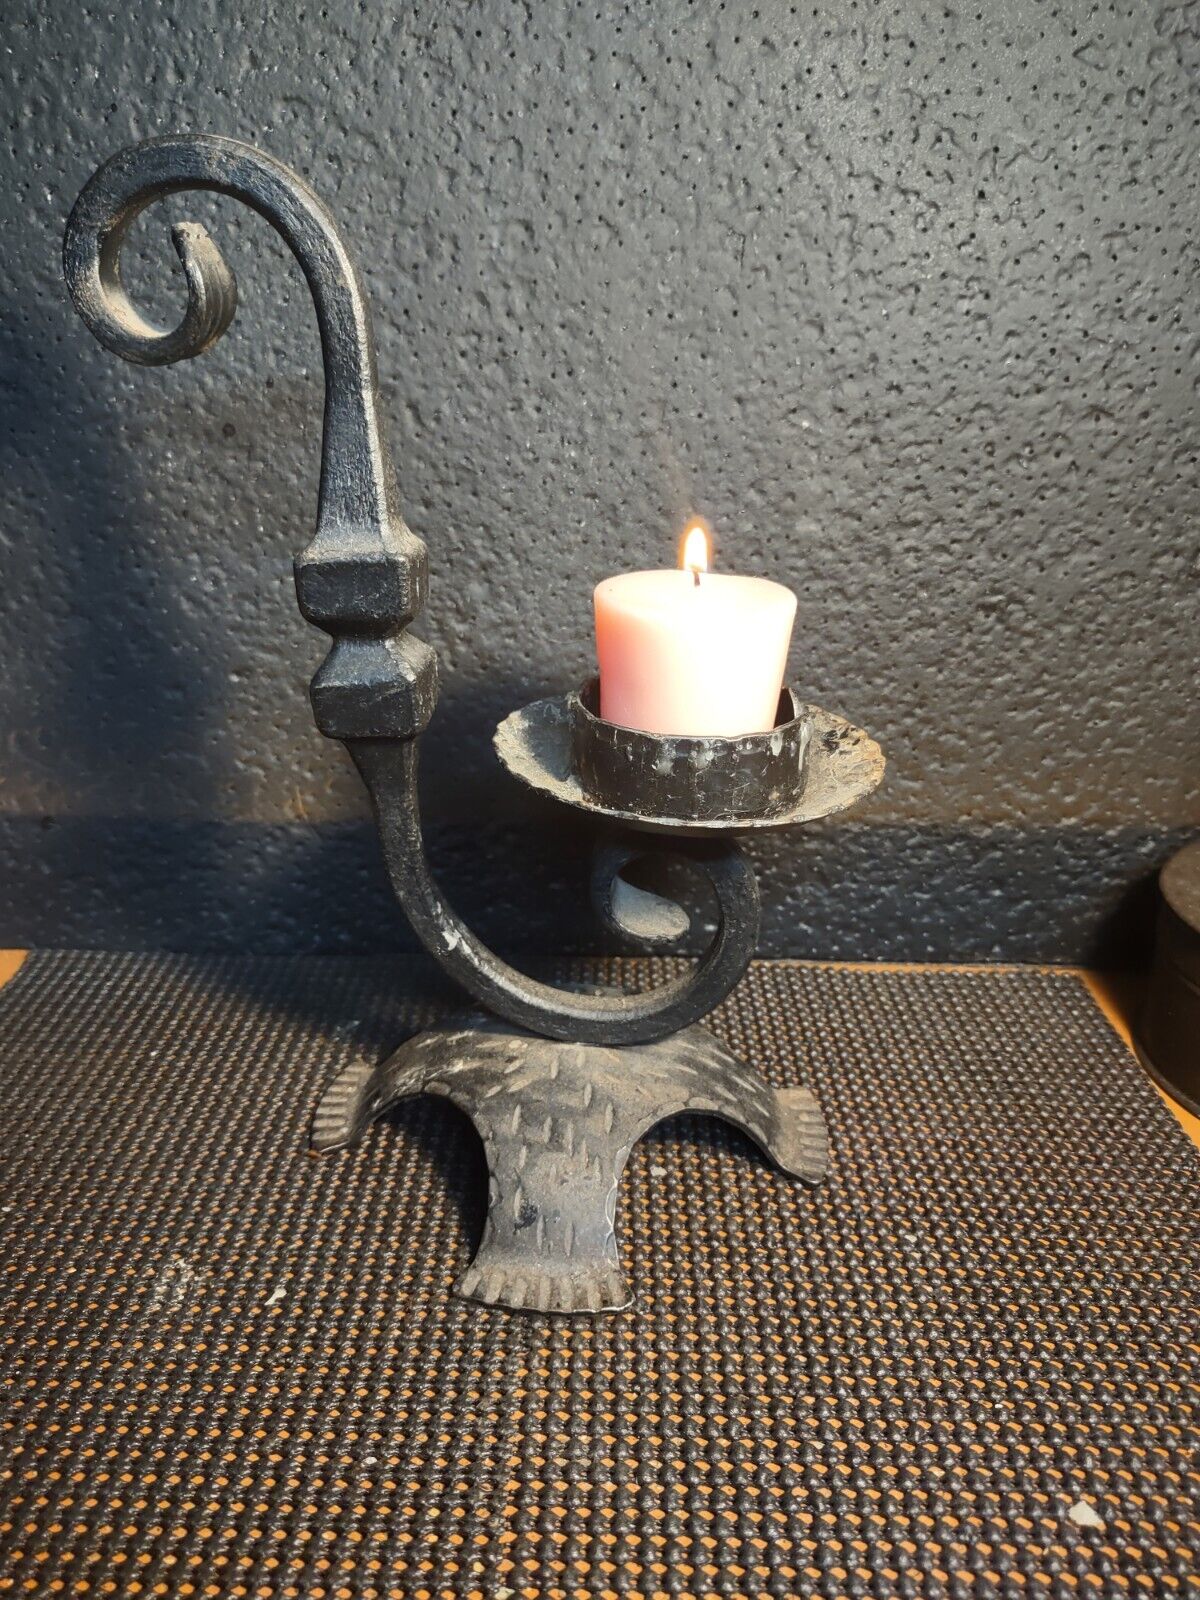 Early Gothic Style Candlestick Circa 1900 1920s